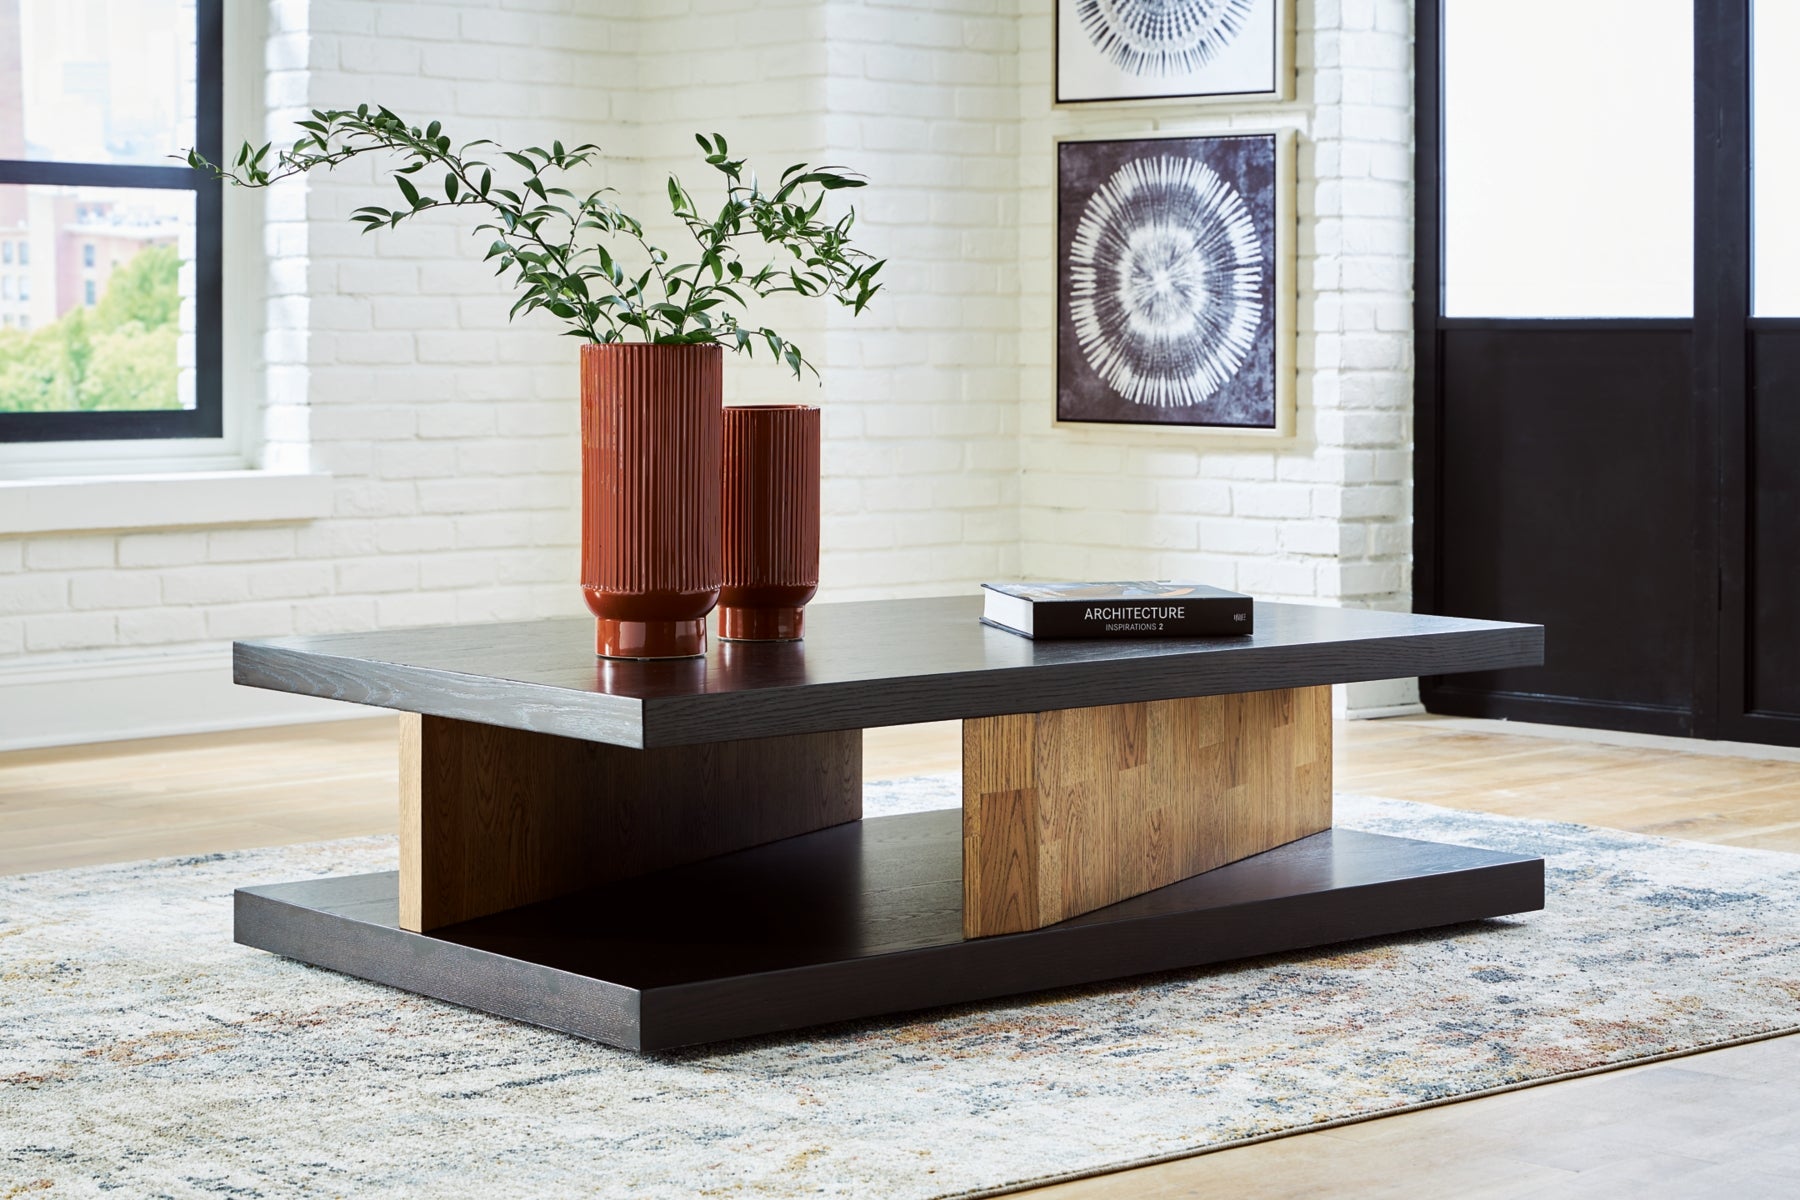 Kocomore Coffee Table with 2 End Tables